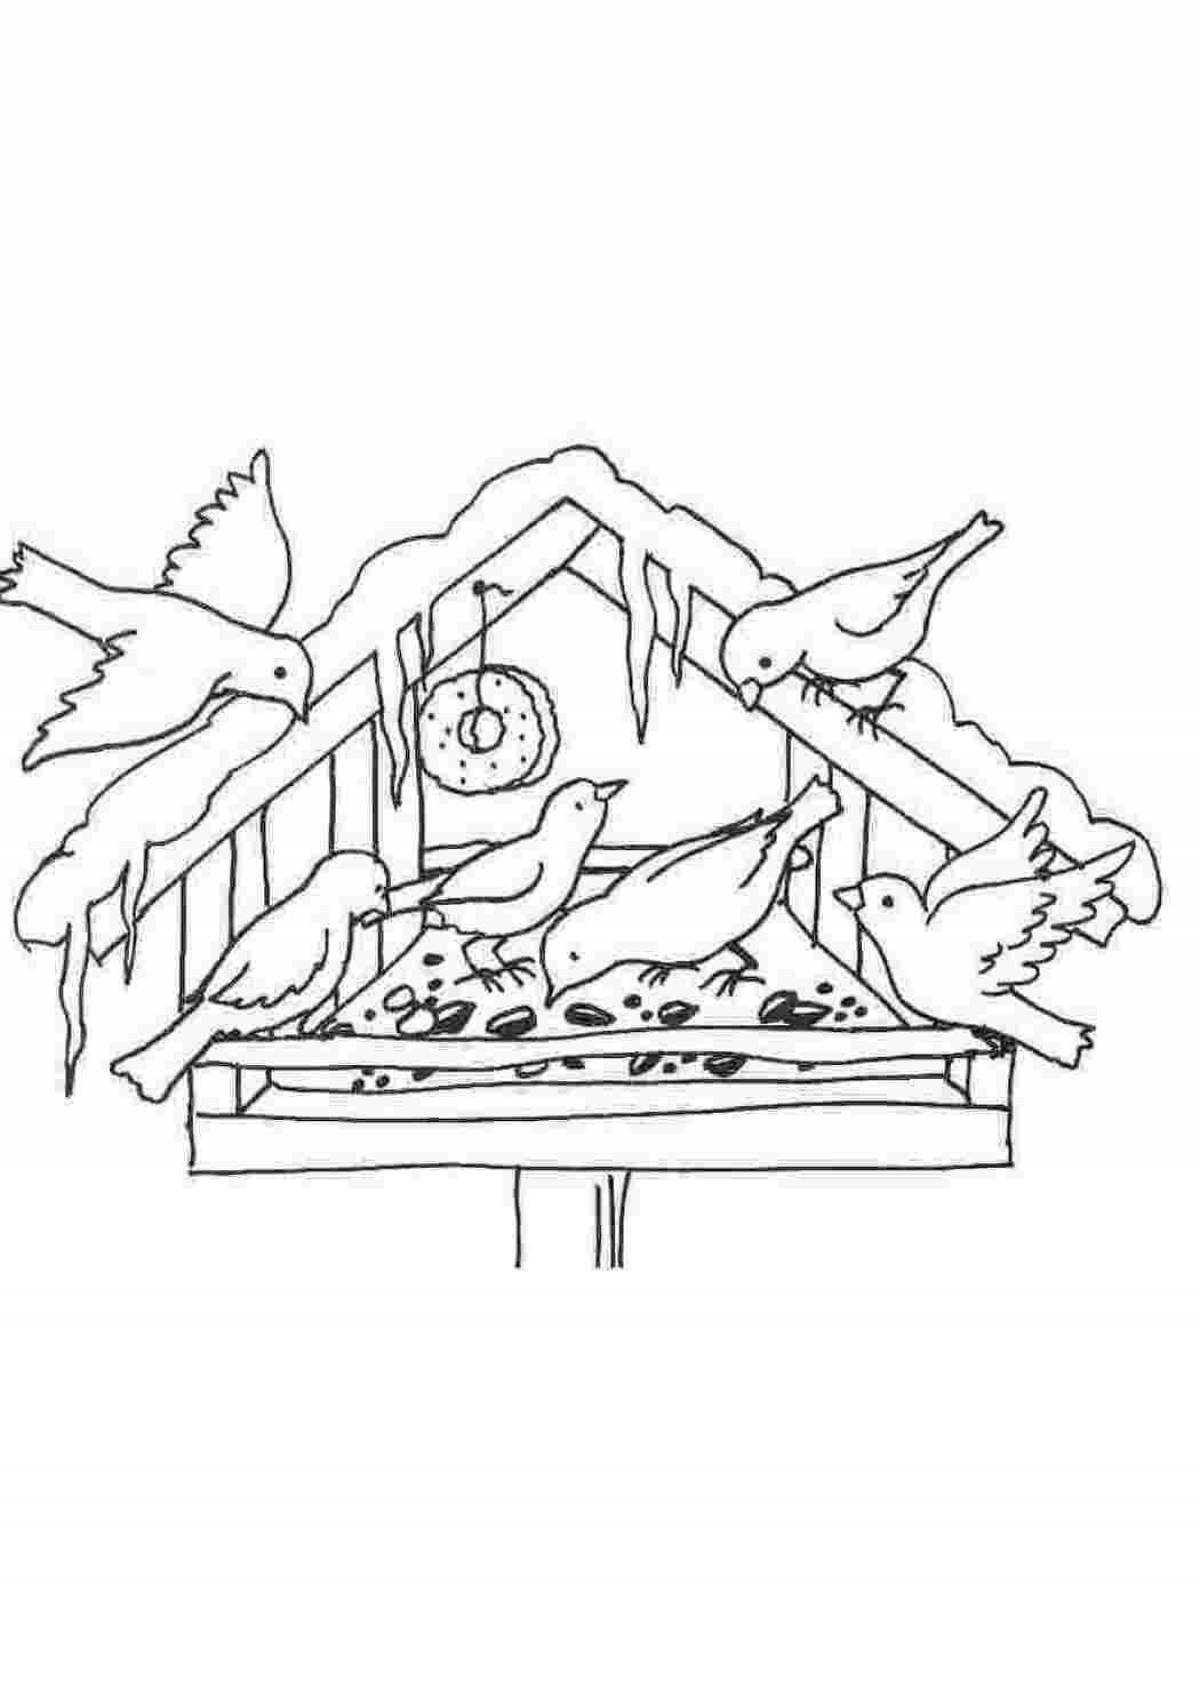 Fat feeder coloring page